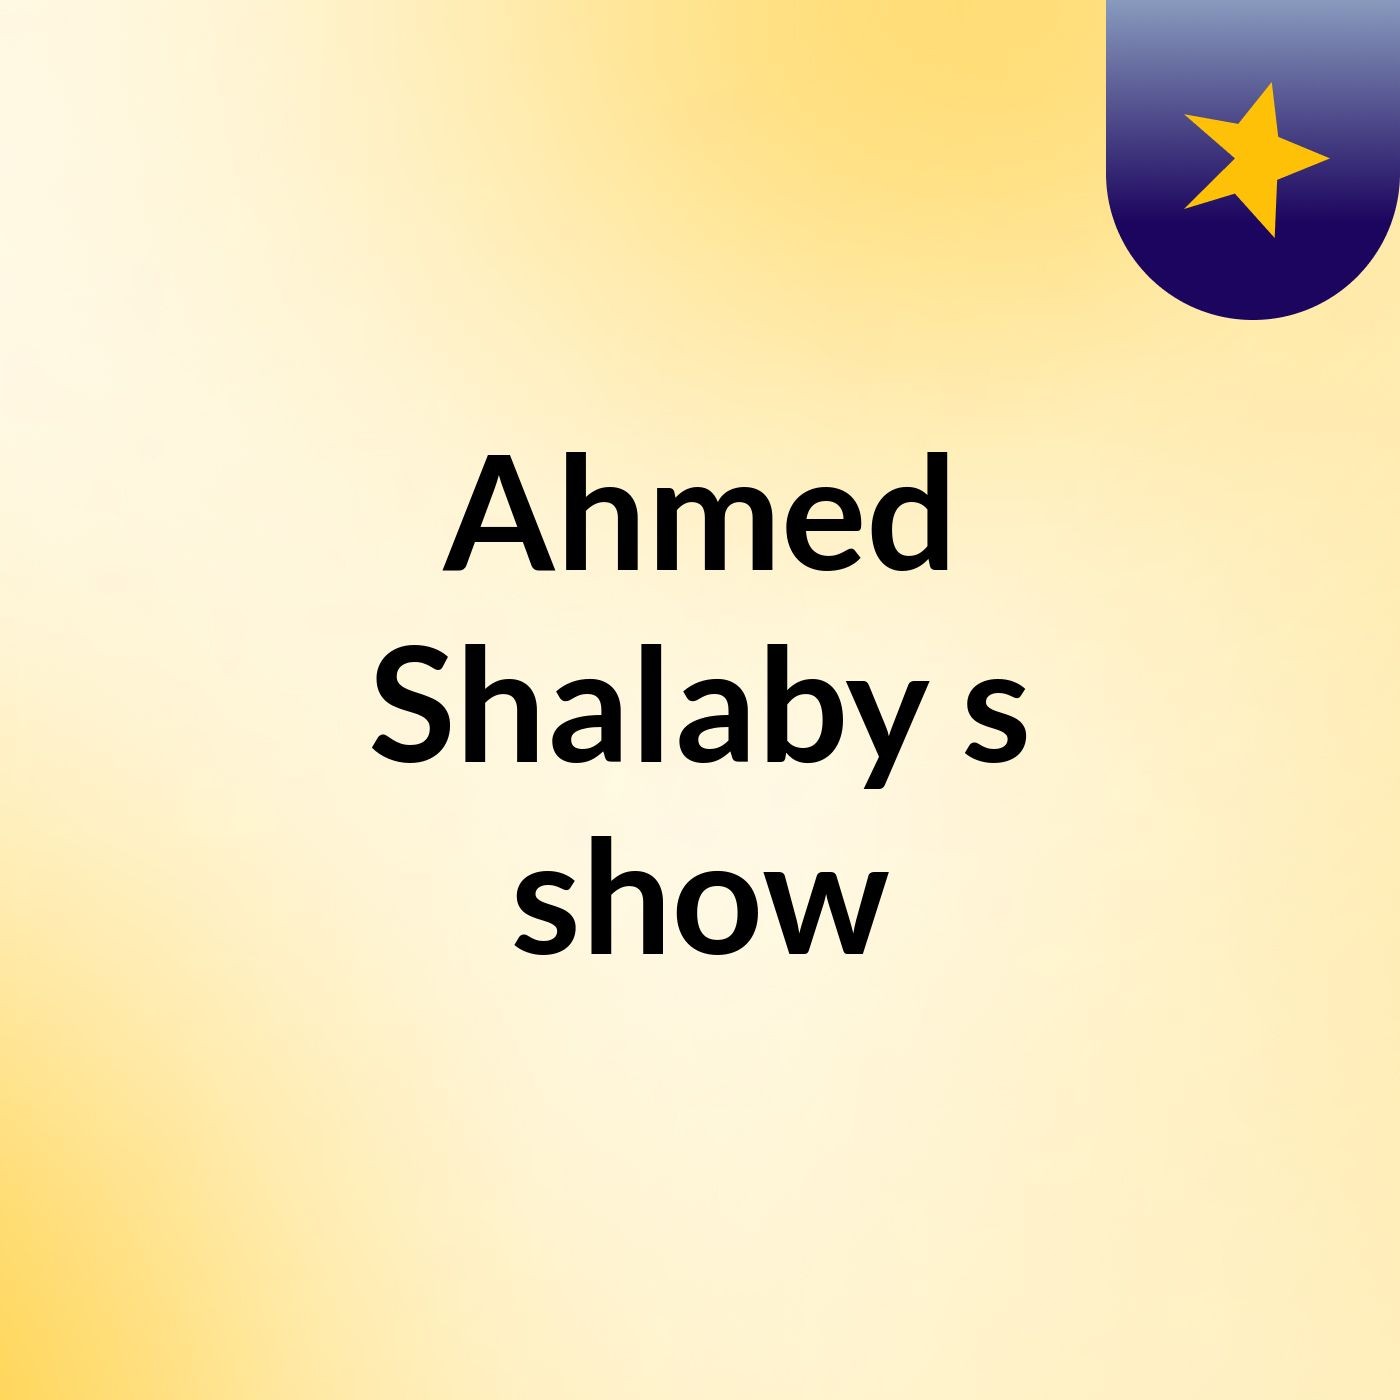 Ahmed Shalaby's show